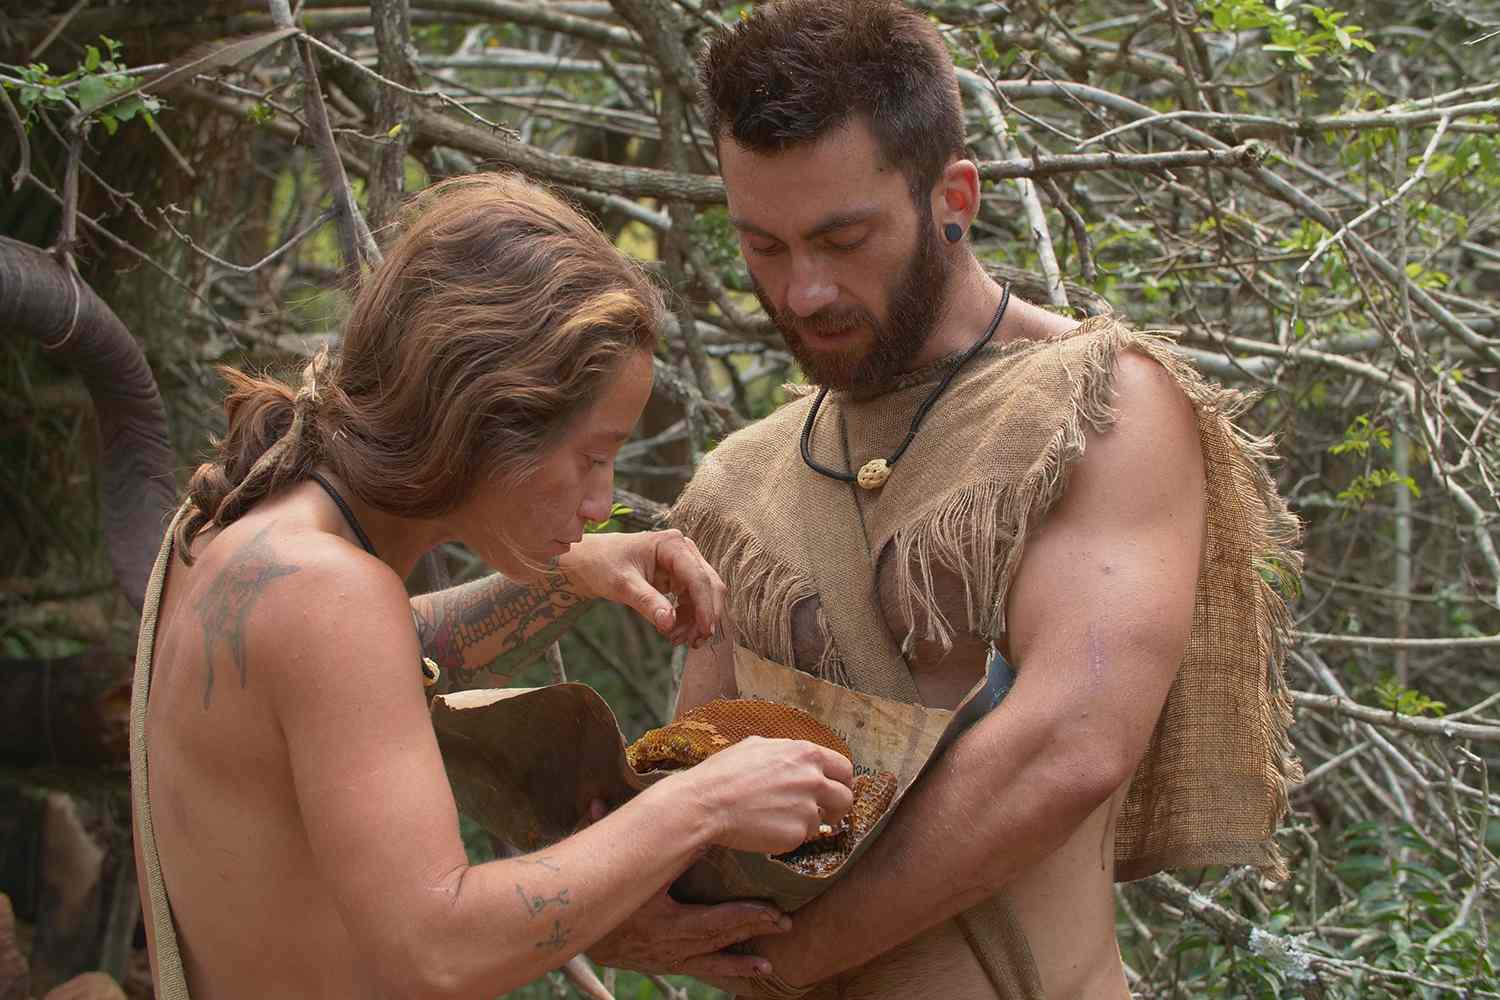 Discovery's "Naked and Afraid: Last One Standing" Returns Sunday, July 14 at 8PM